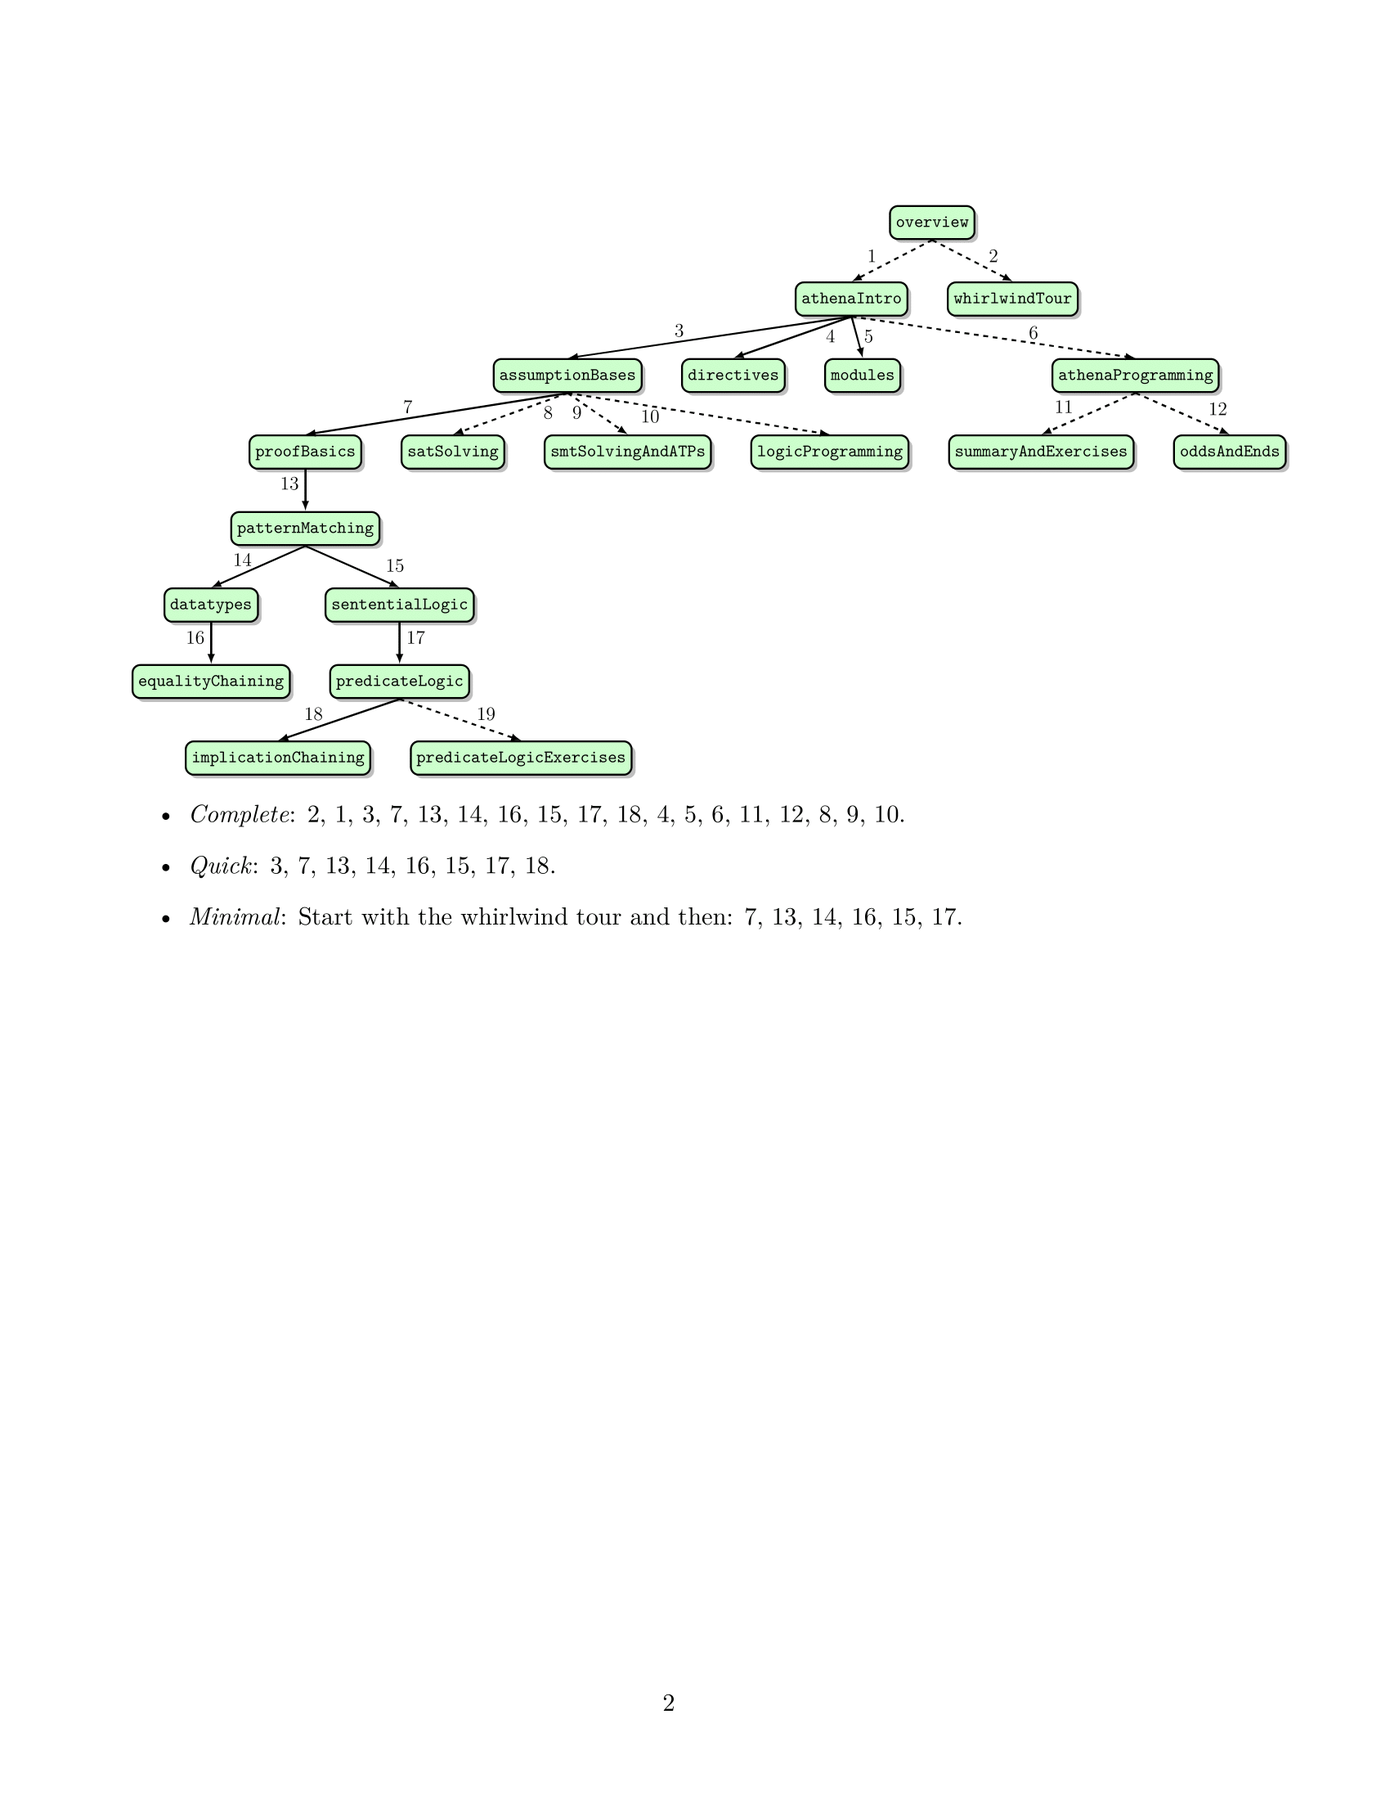 Athena courses sequence and dependency tree